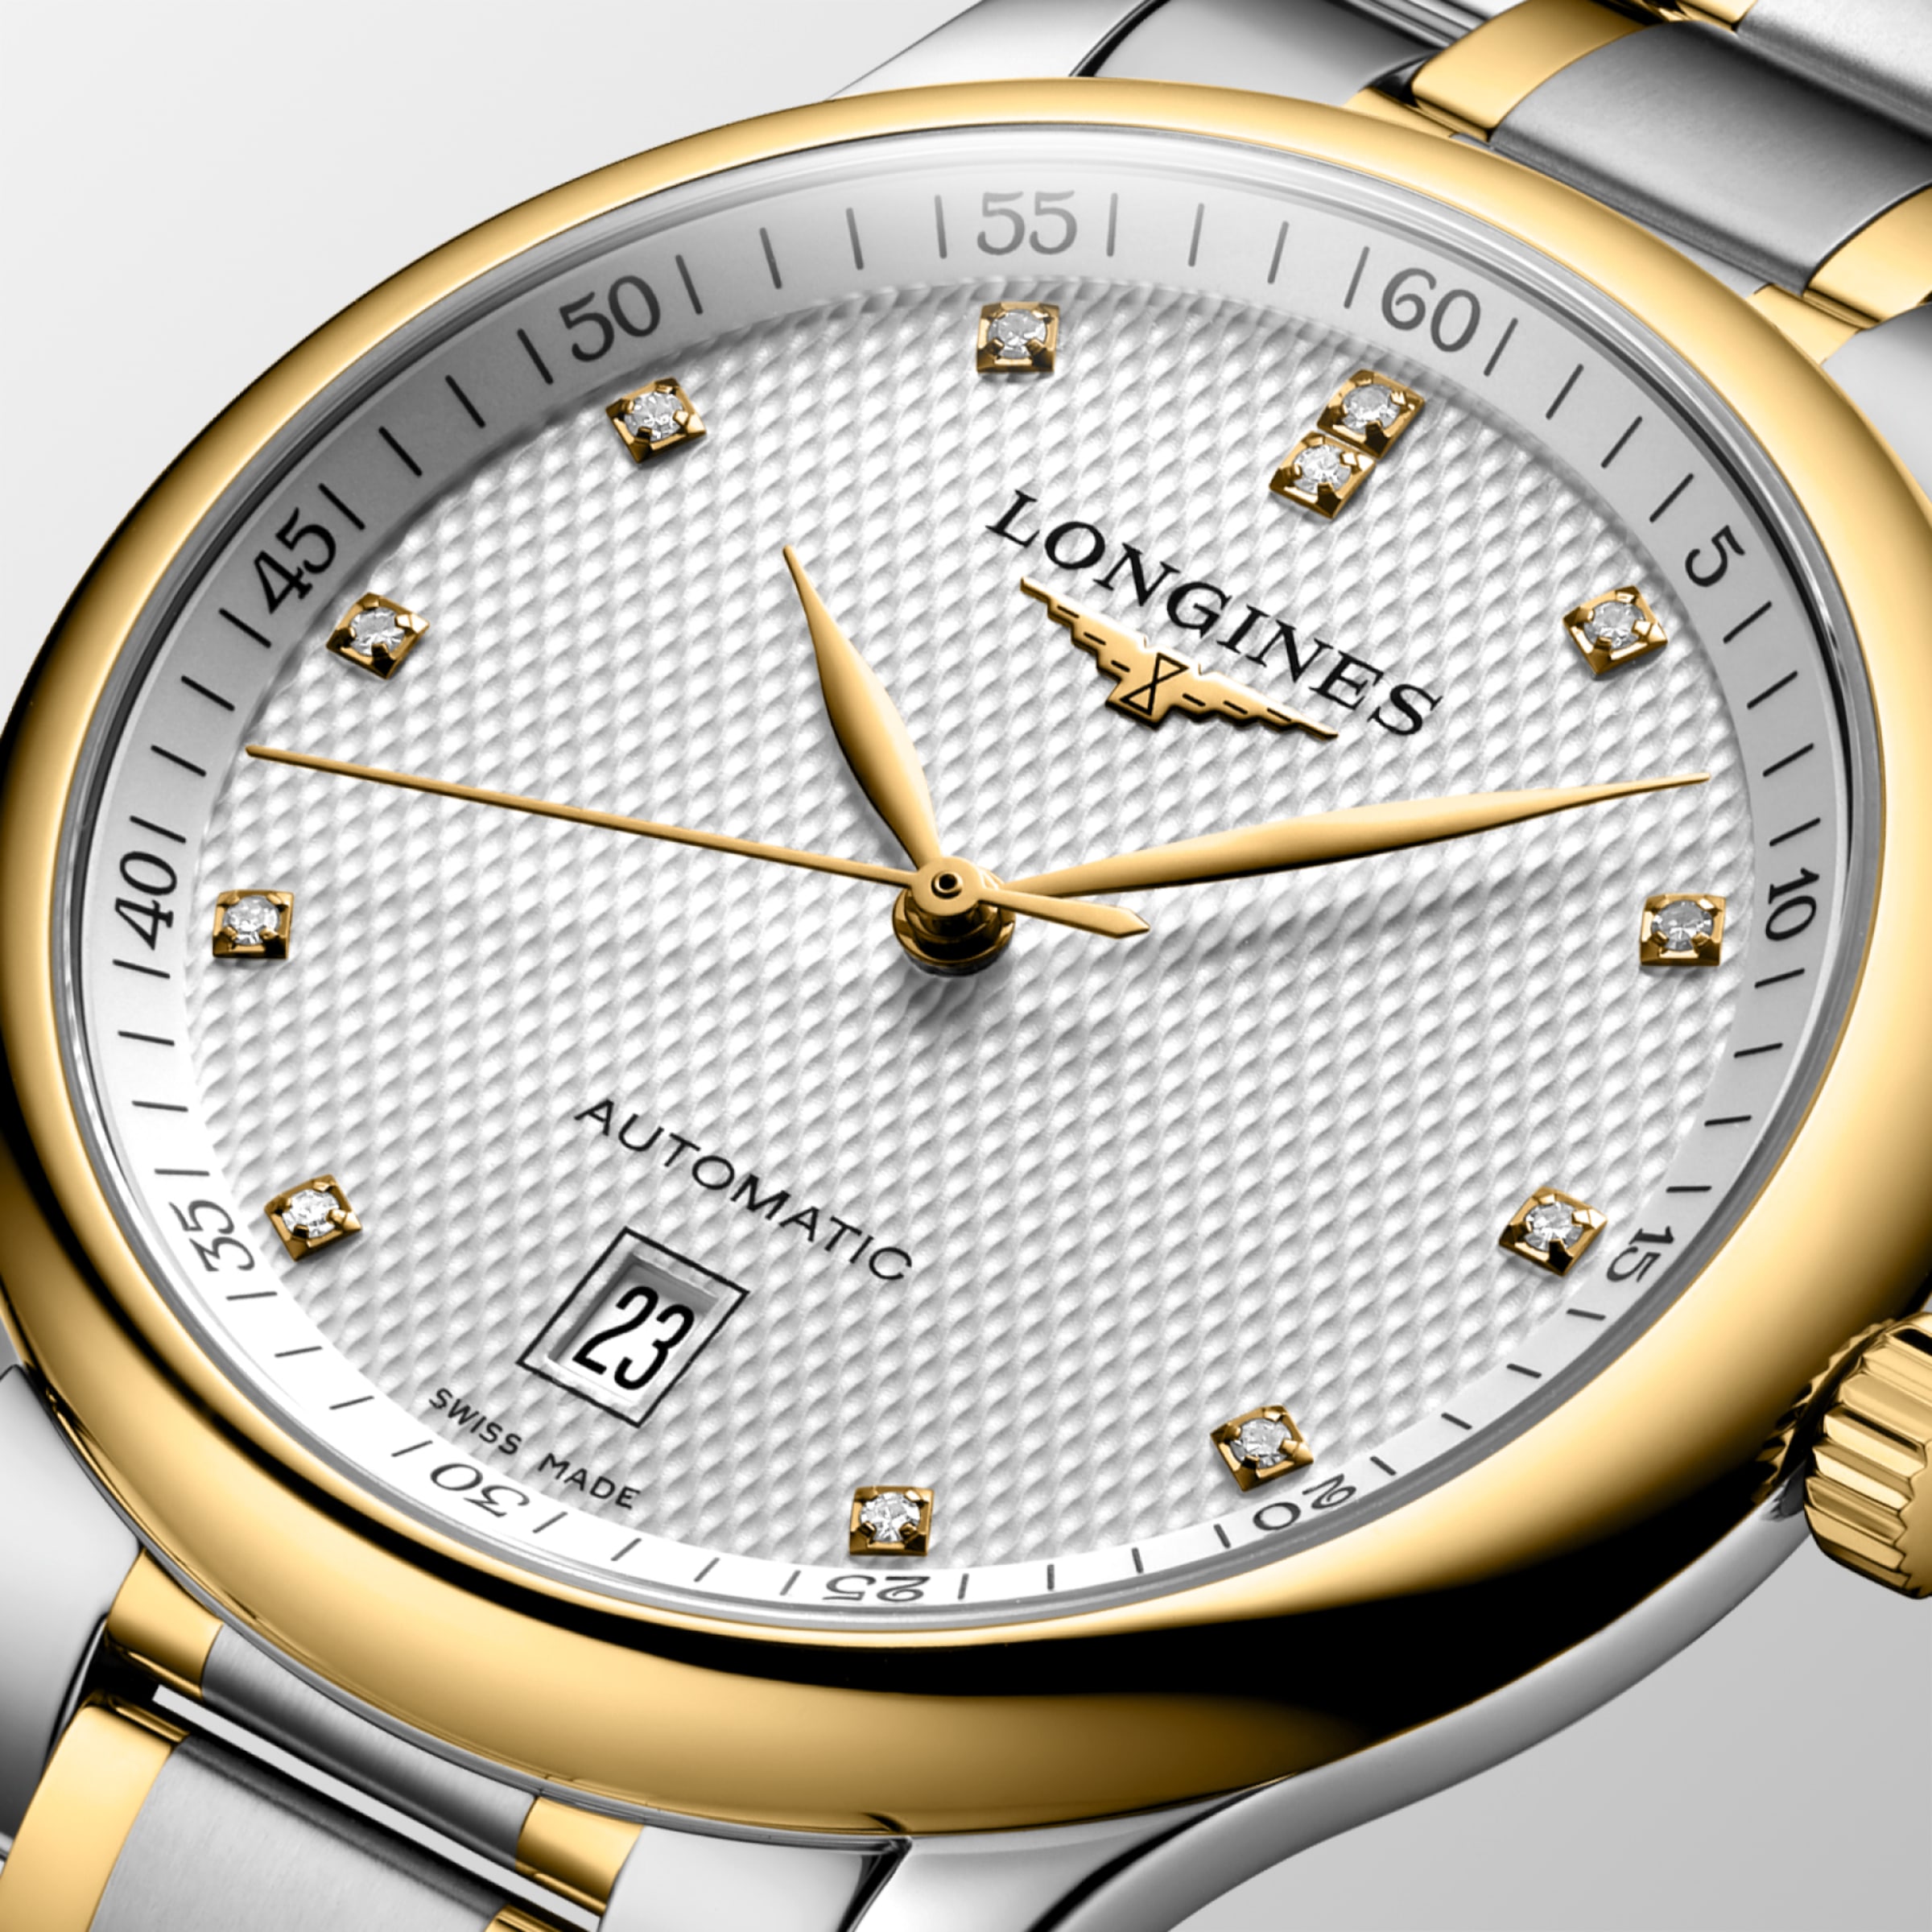 Longines MASTER COLLECTION Automatic Stainless steel and 18 karat yellow gold cap 200 Watch - L2.628.5.77.7